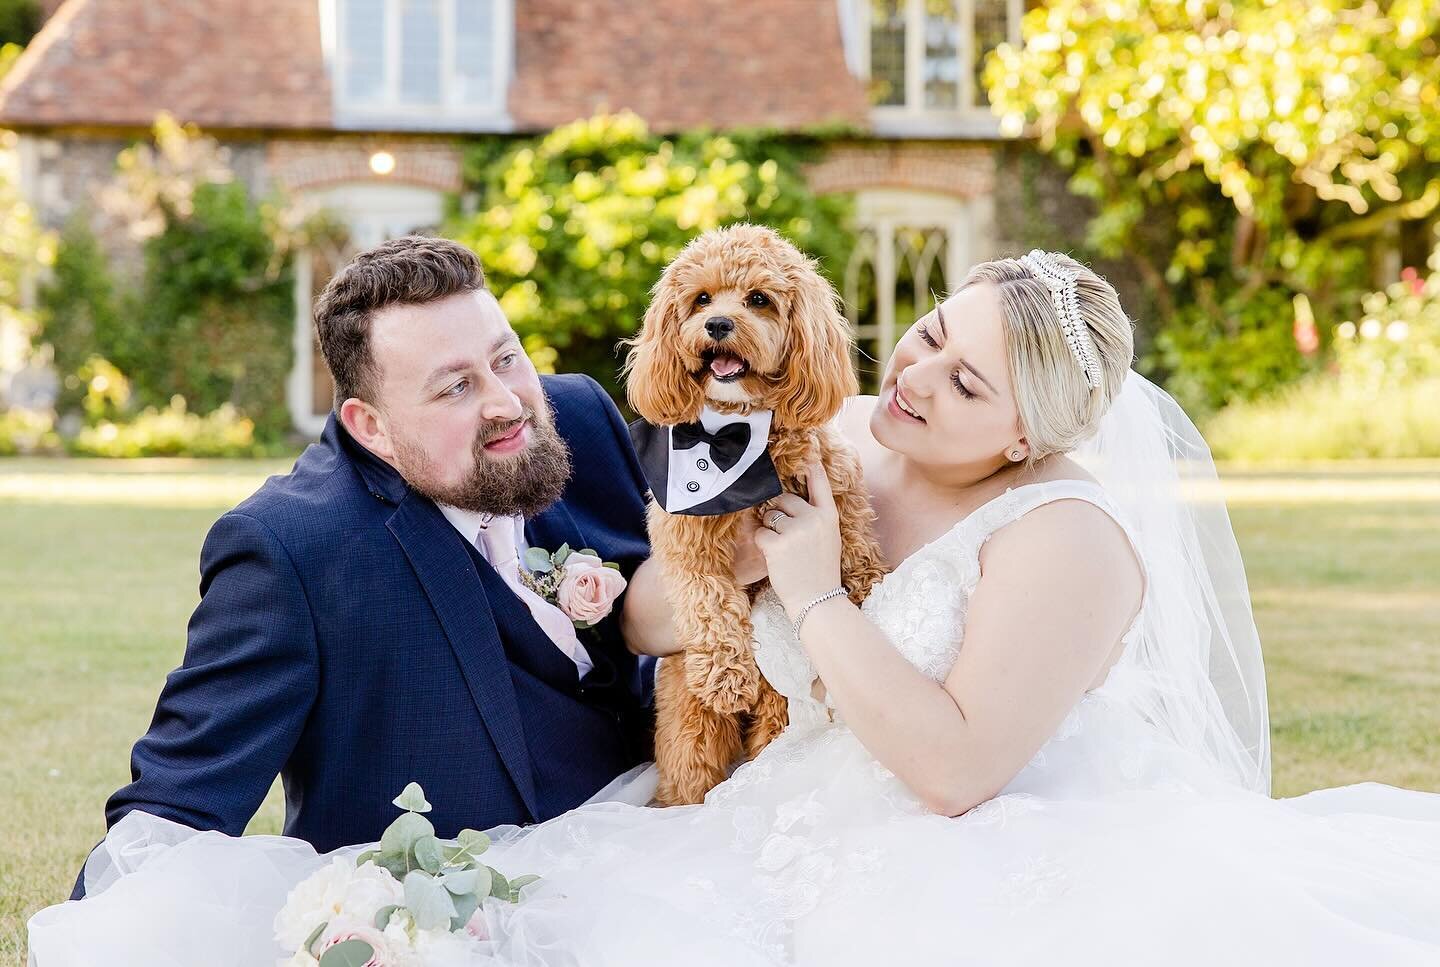 Dexter steals the spotlight once more!

Thrilled to see his adorable photos showcased in @a_kentish_ceremony magazine&rsquo;s &rsquo;Ask The Experts&rsquo; feature, where @herecomesthehound shares insights on planning your pet into your wedding celeb